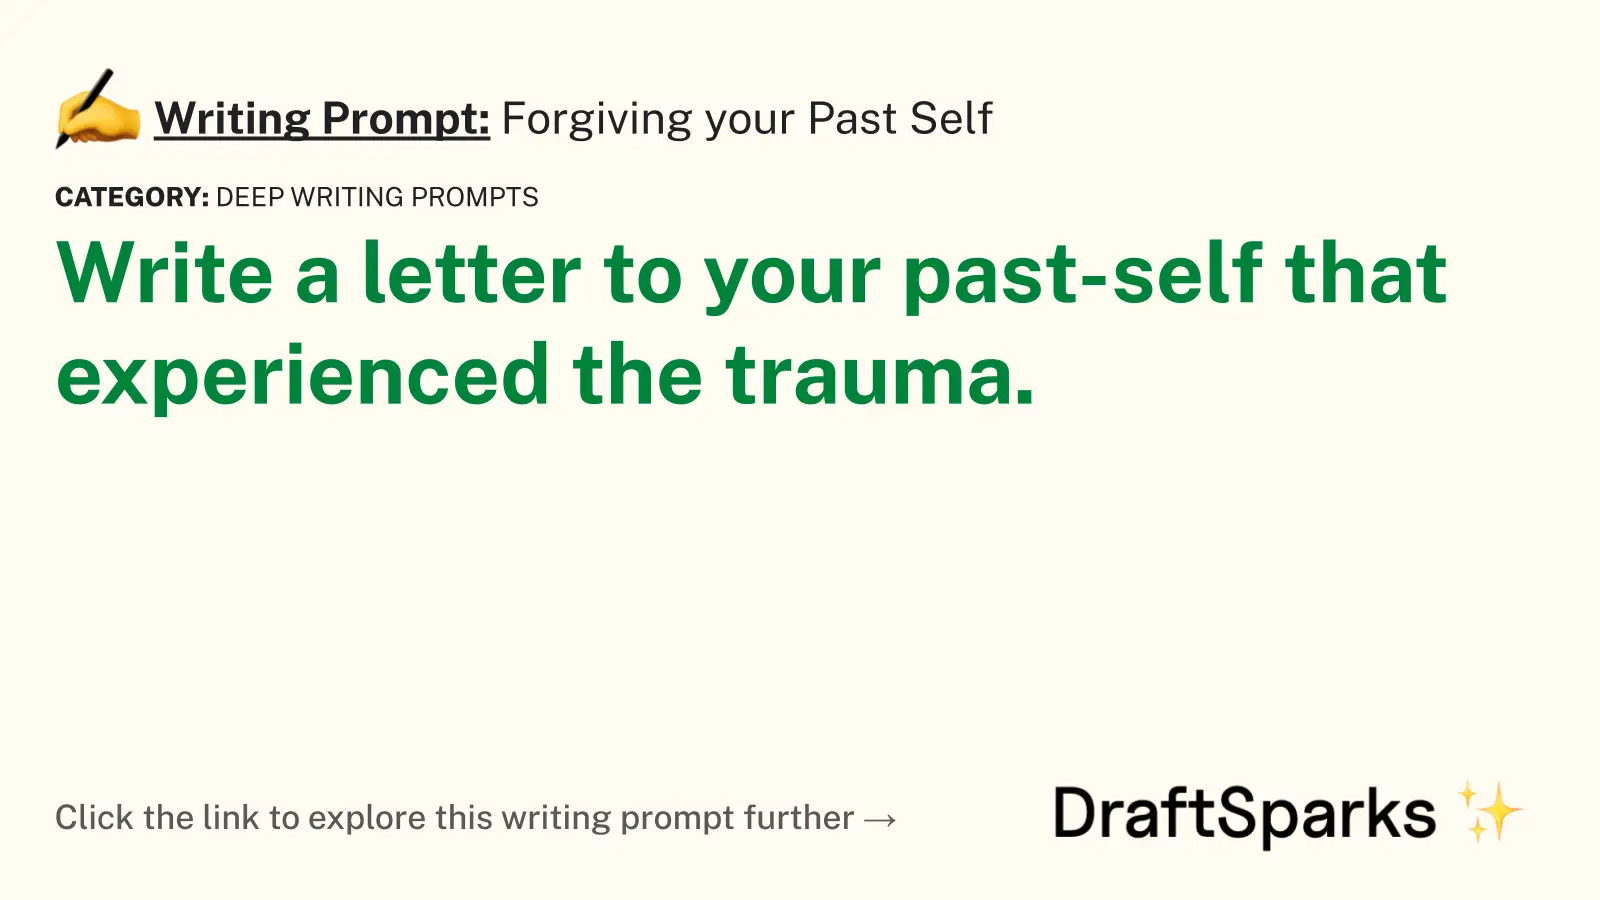 Forgiving your Past Self